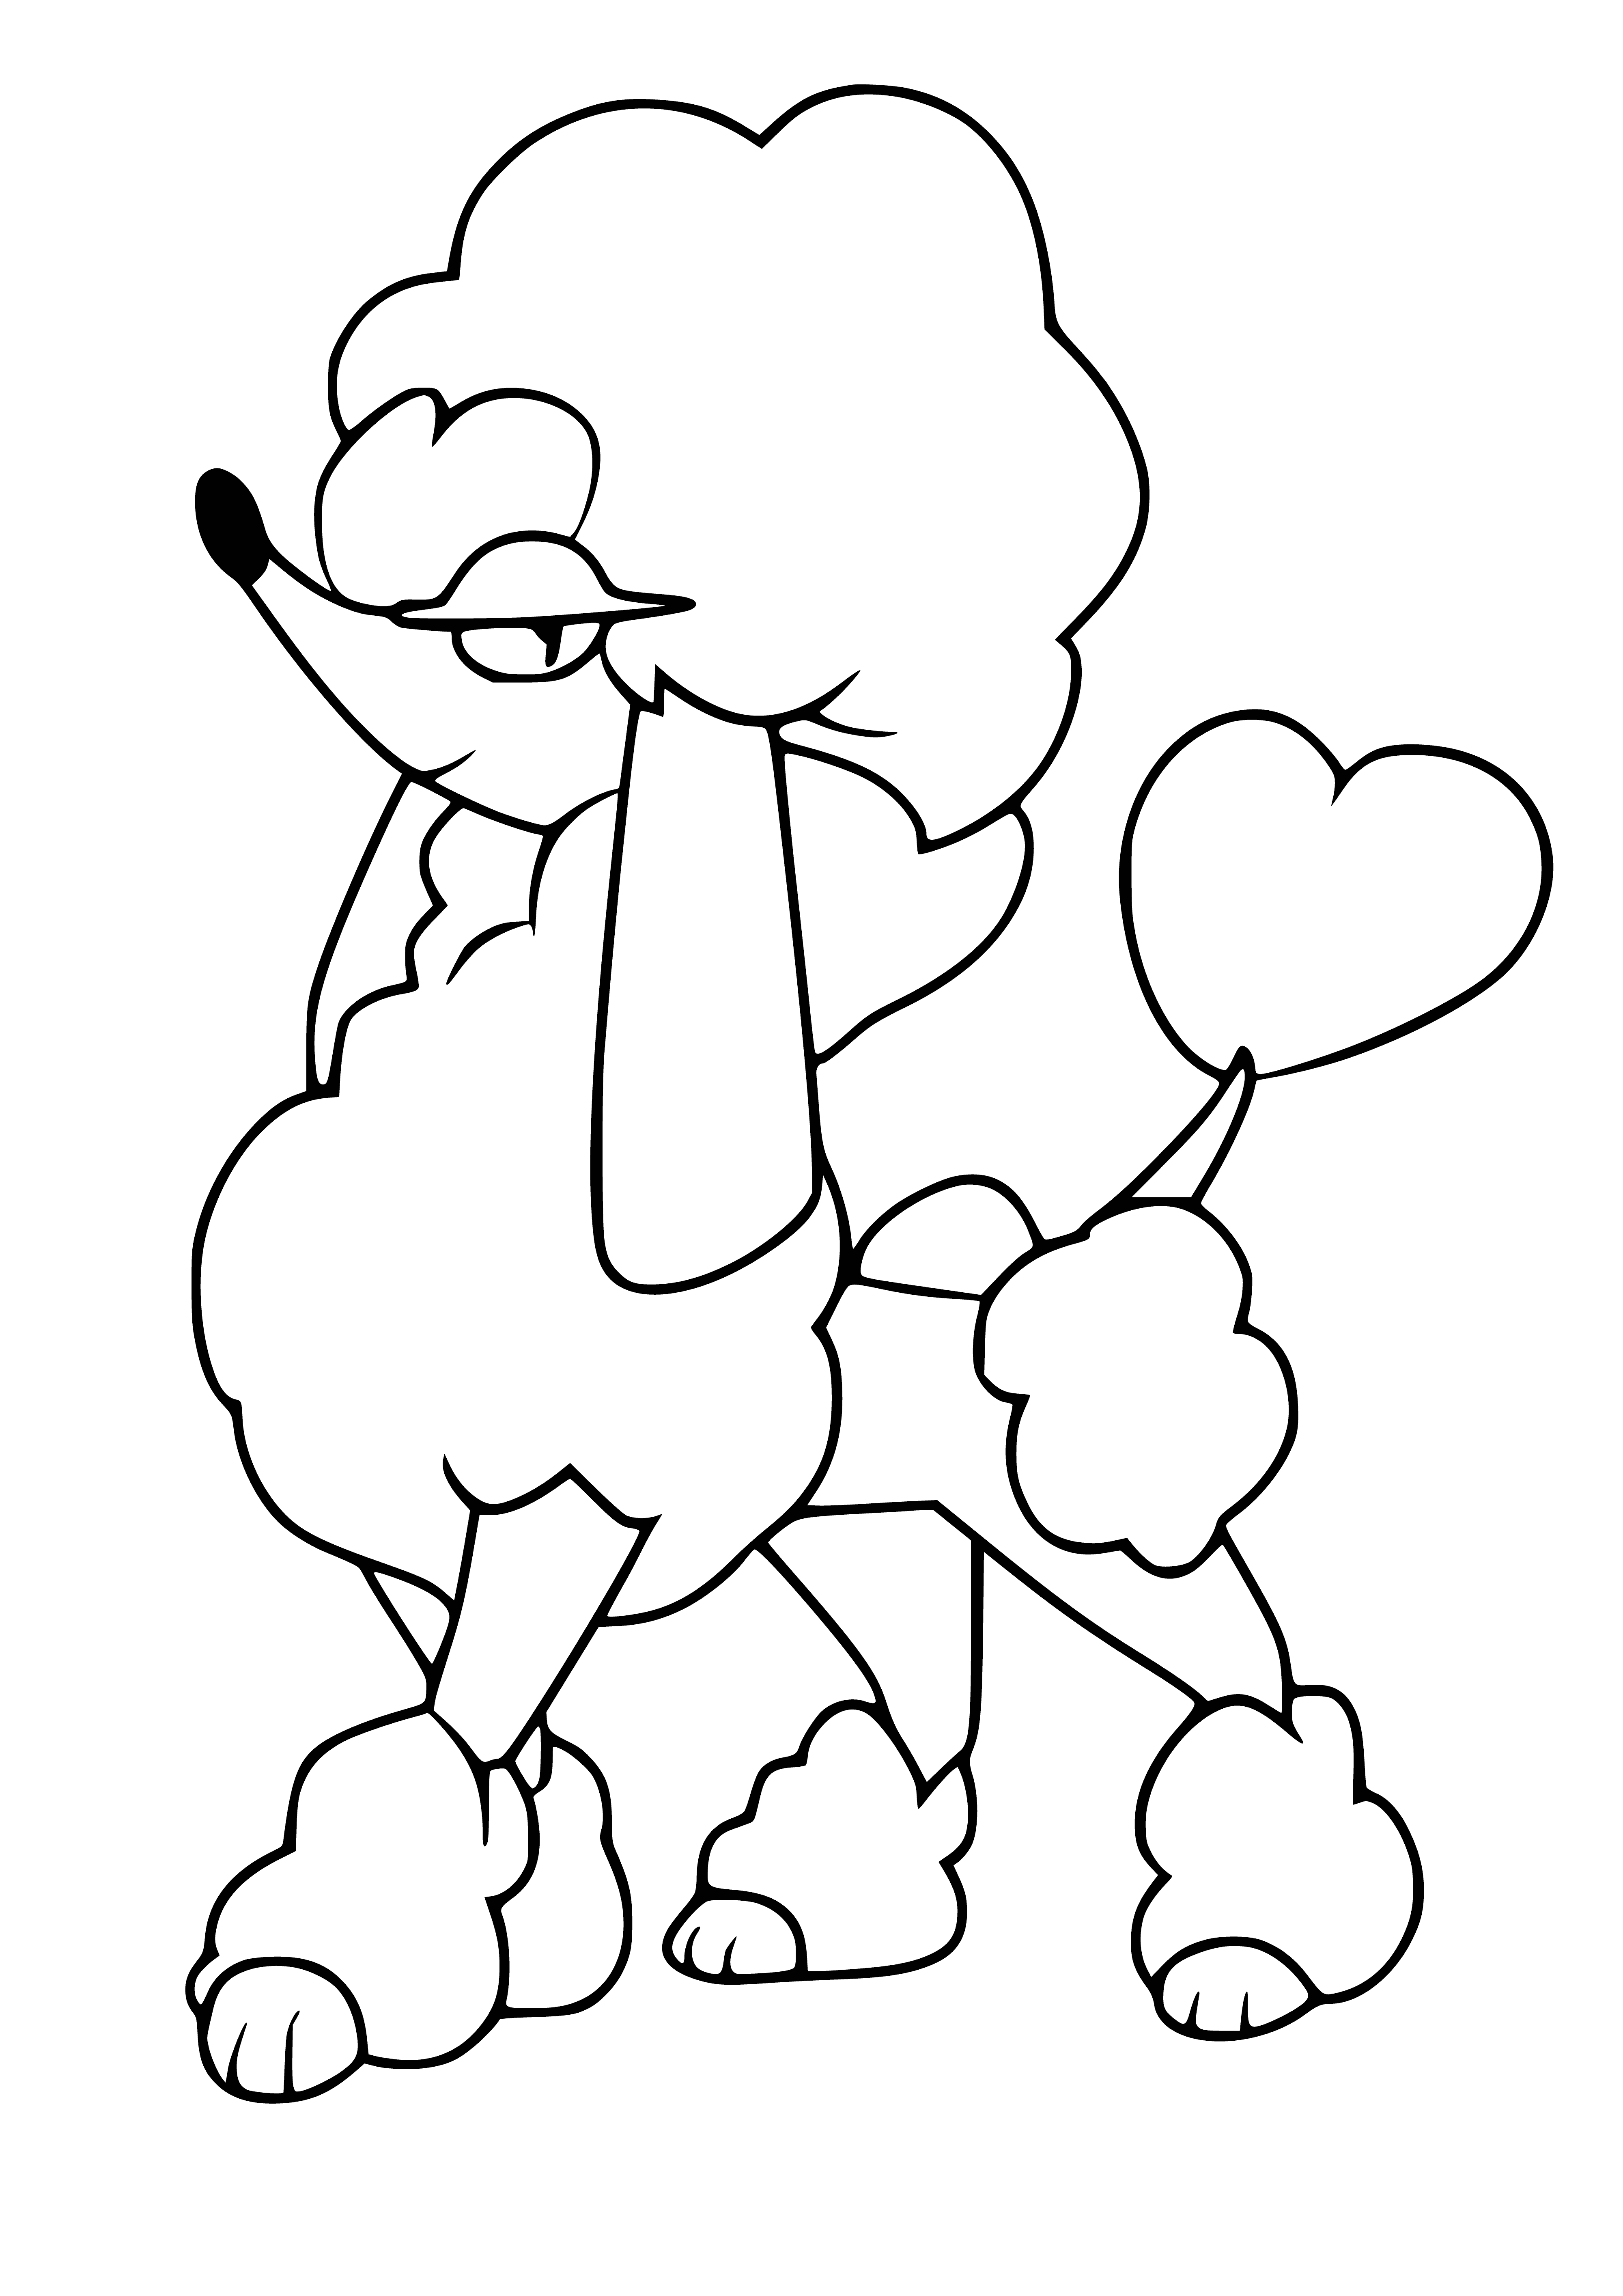 coloring page: Furfrou is a Pokemon with four legs, a long snout & big ears; cream-colored with black markings & a heart-shaped tuft of fur on its head.